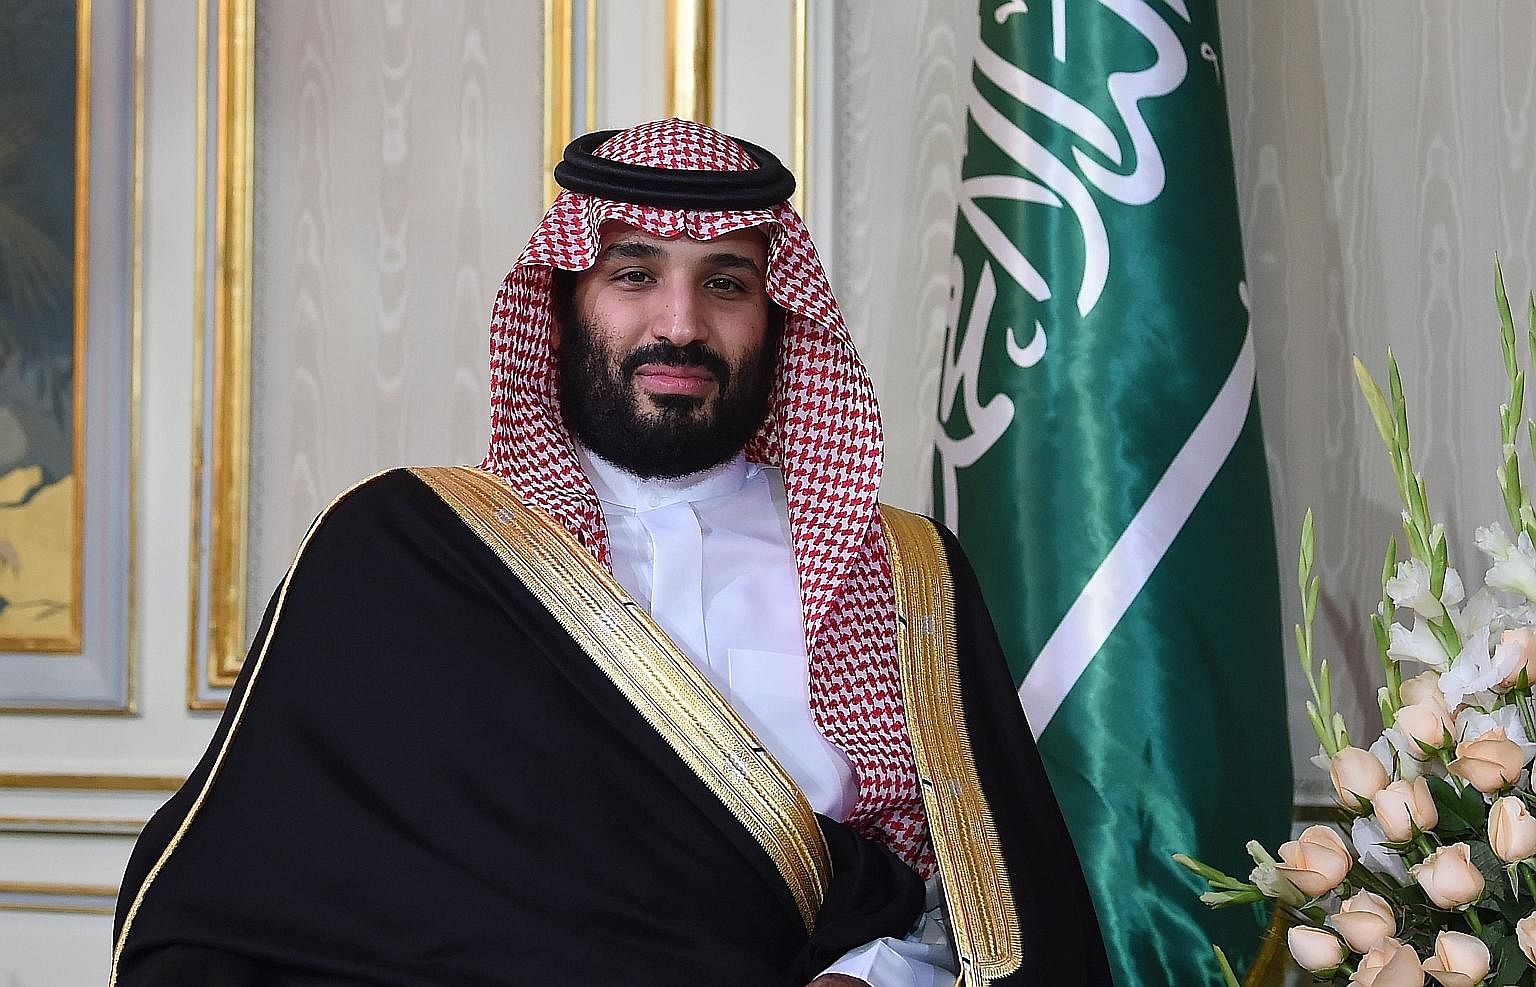 Crown Prince Mohammad bin Salman's moves are likely to face closer scrutiny after the death of a journalist.